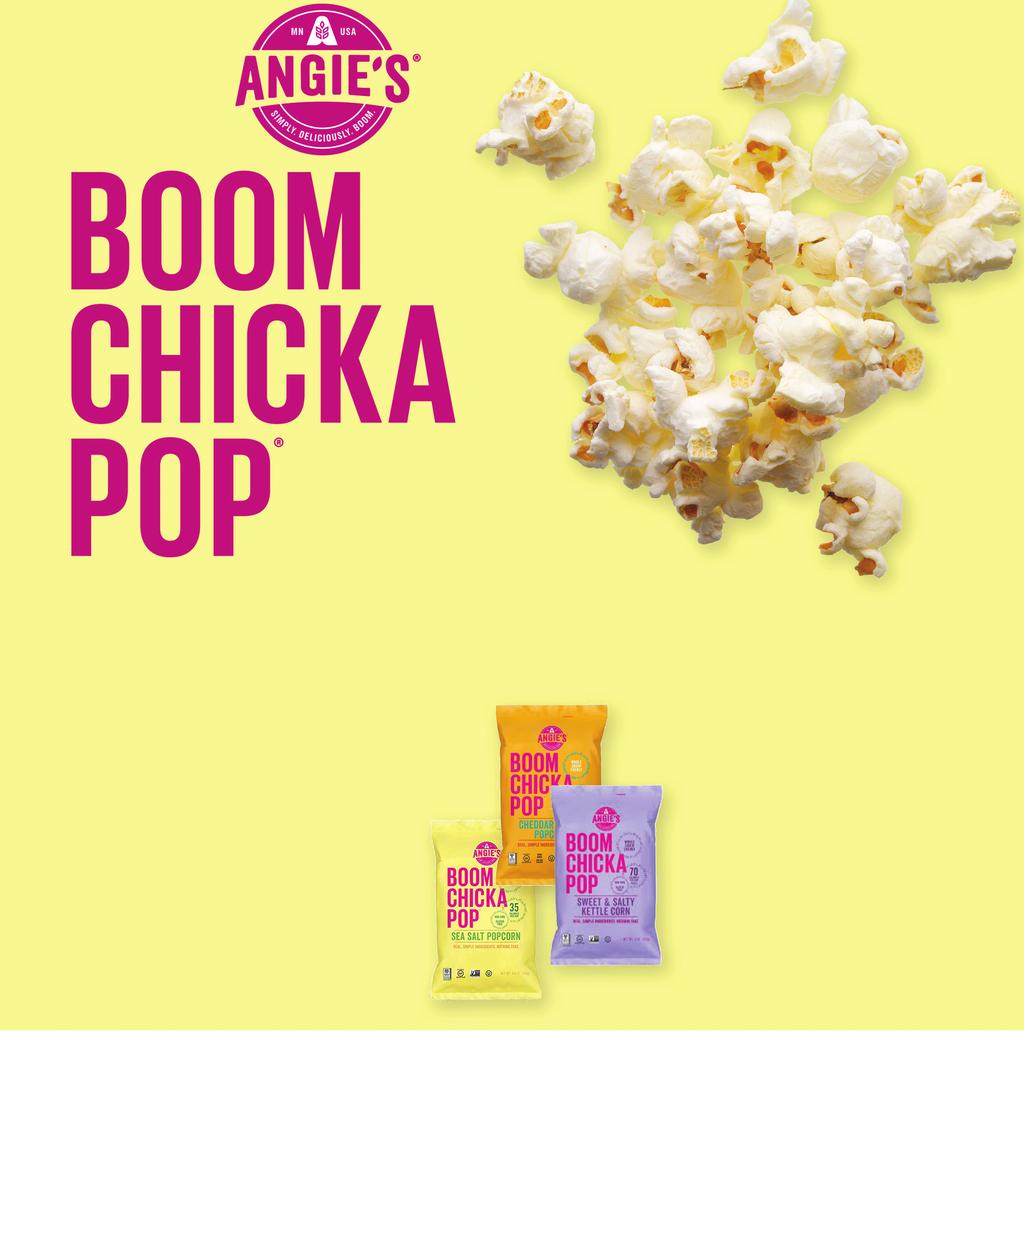 ANGIE S BOOMCCKAPOP Wholesome snacks, healthy sales Angie s is all about real, simple ingredients. People love the authentic flavor, family-oriented story and live out loud attitude.